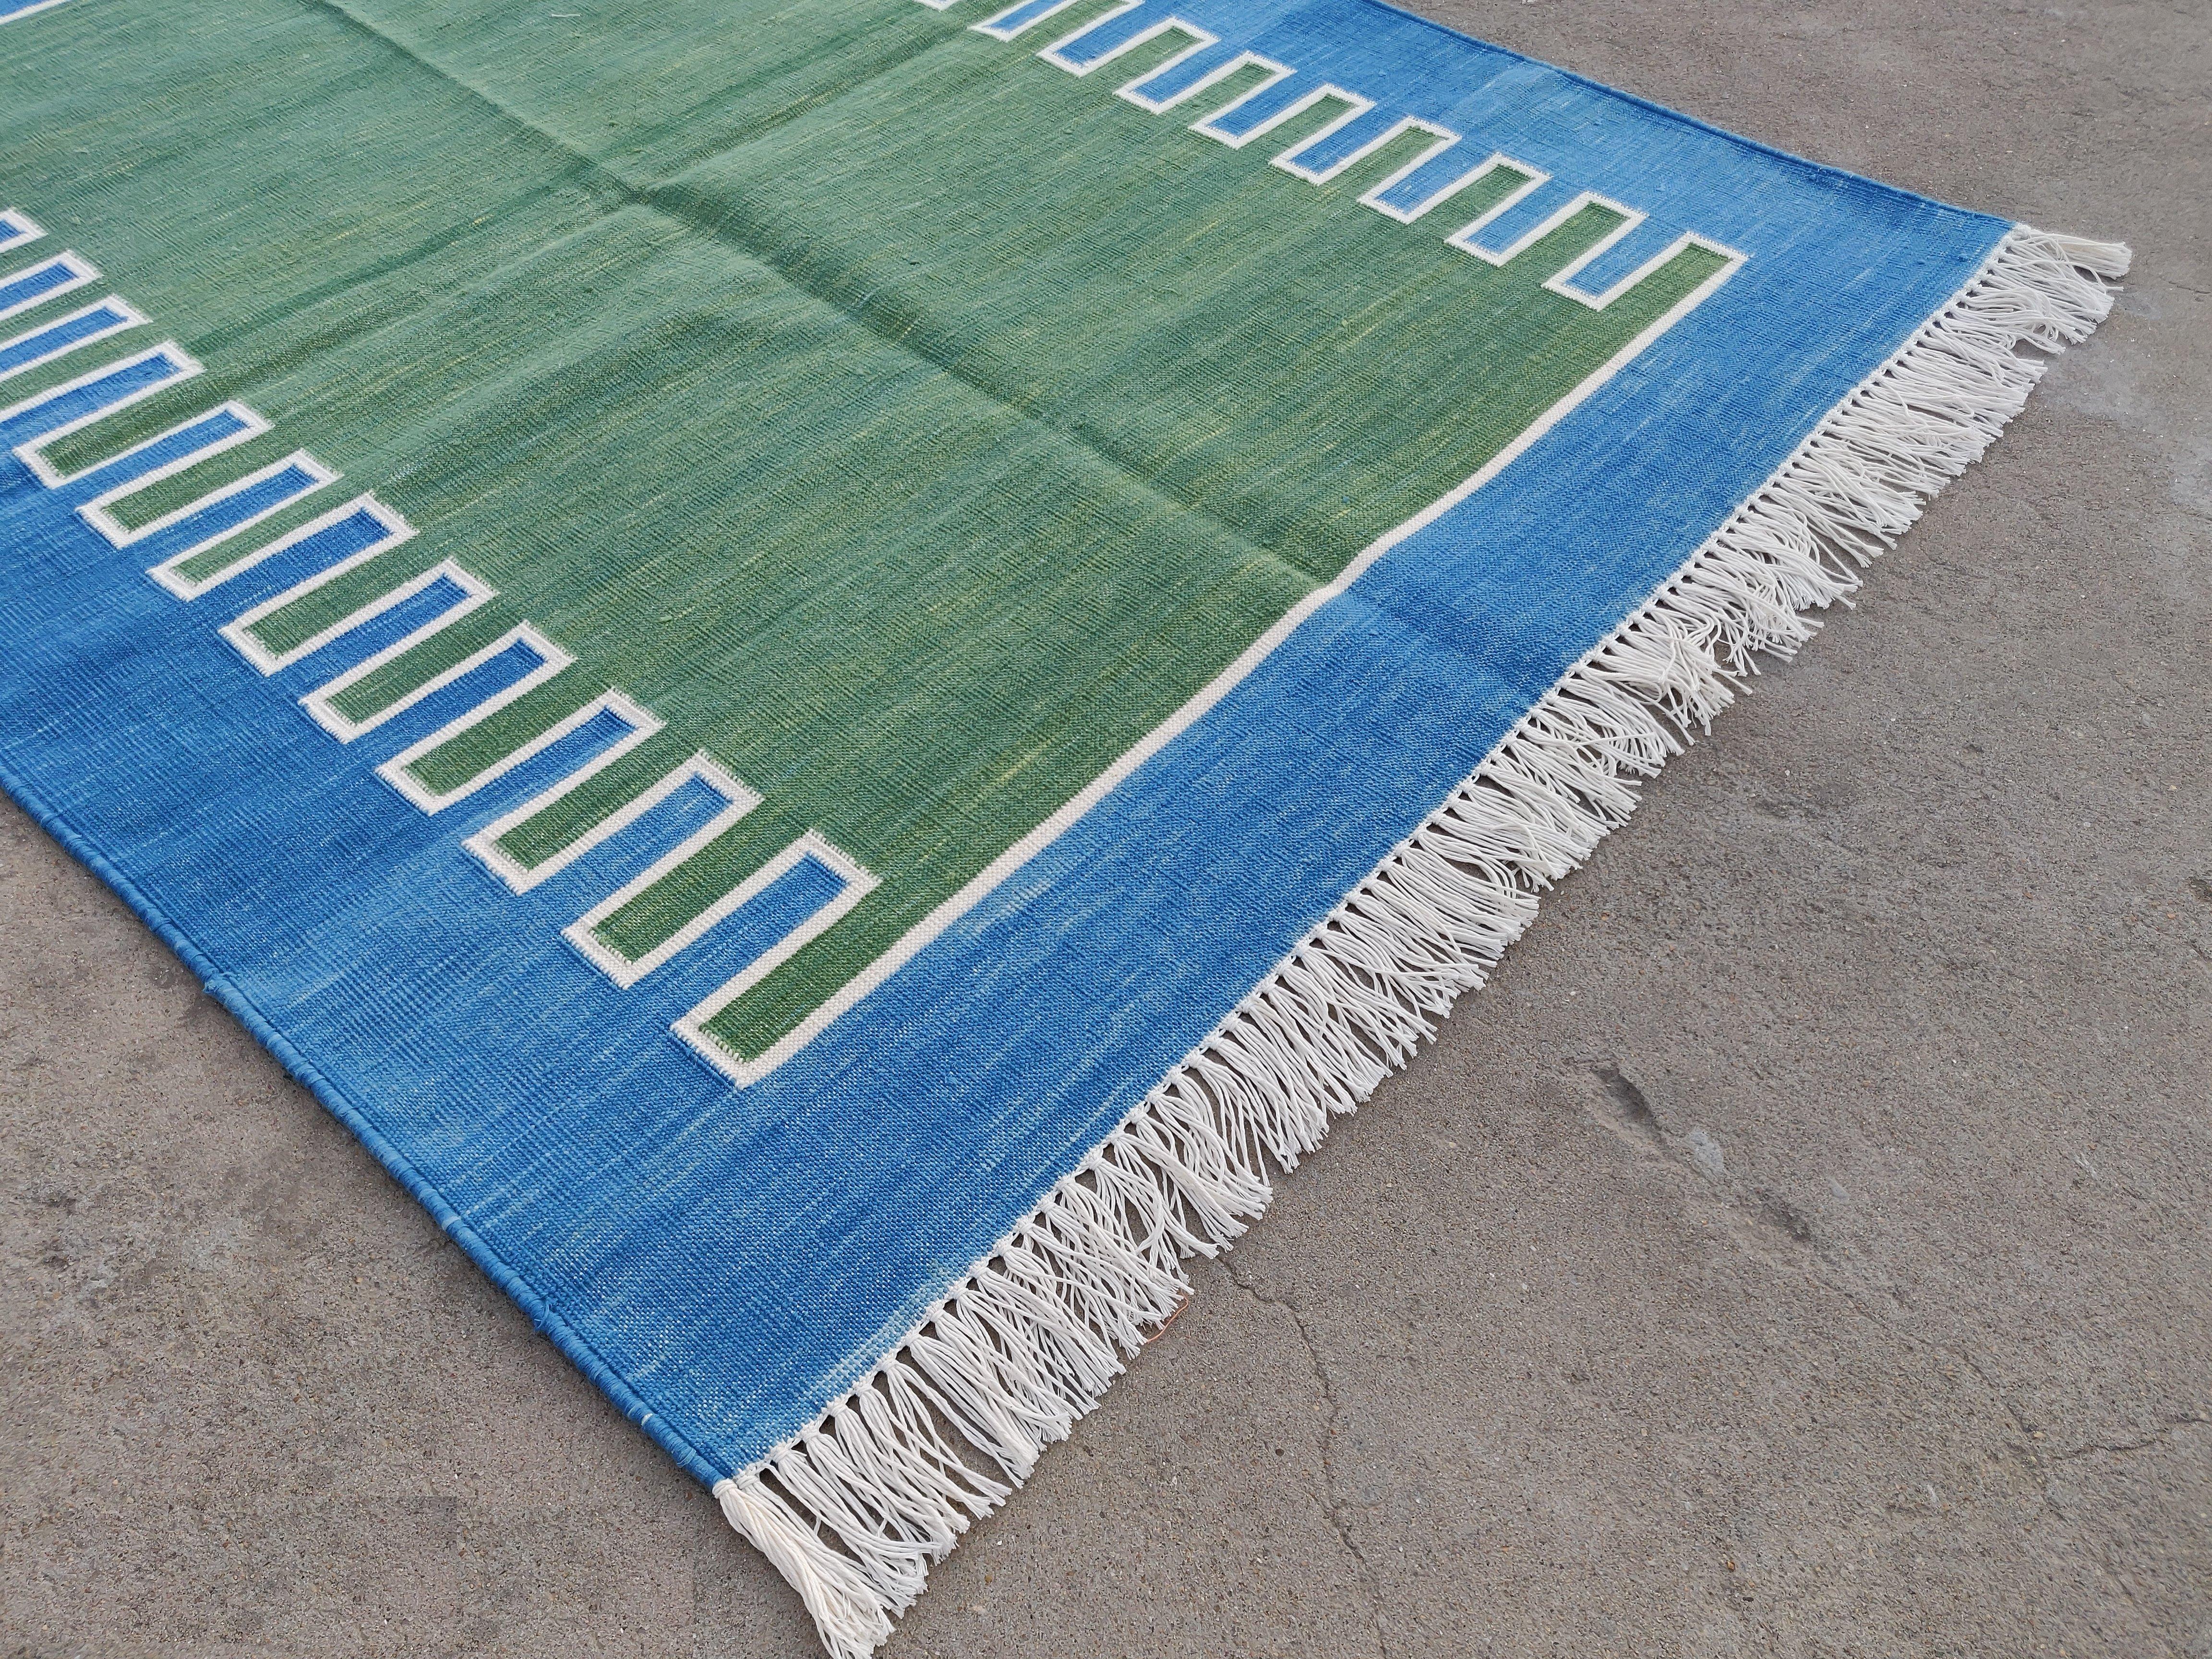 Mid-Century Modern Handmade Cotton Area Flat Weave Rug, 3x5 Green And Blue Striped Indian Dhurrie For Sale